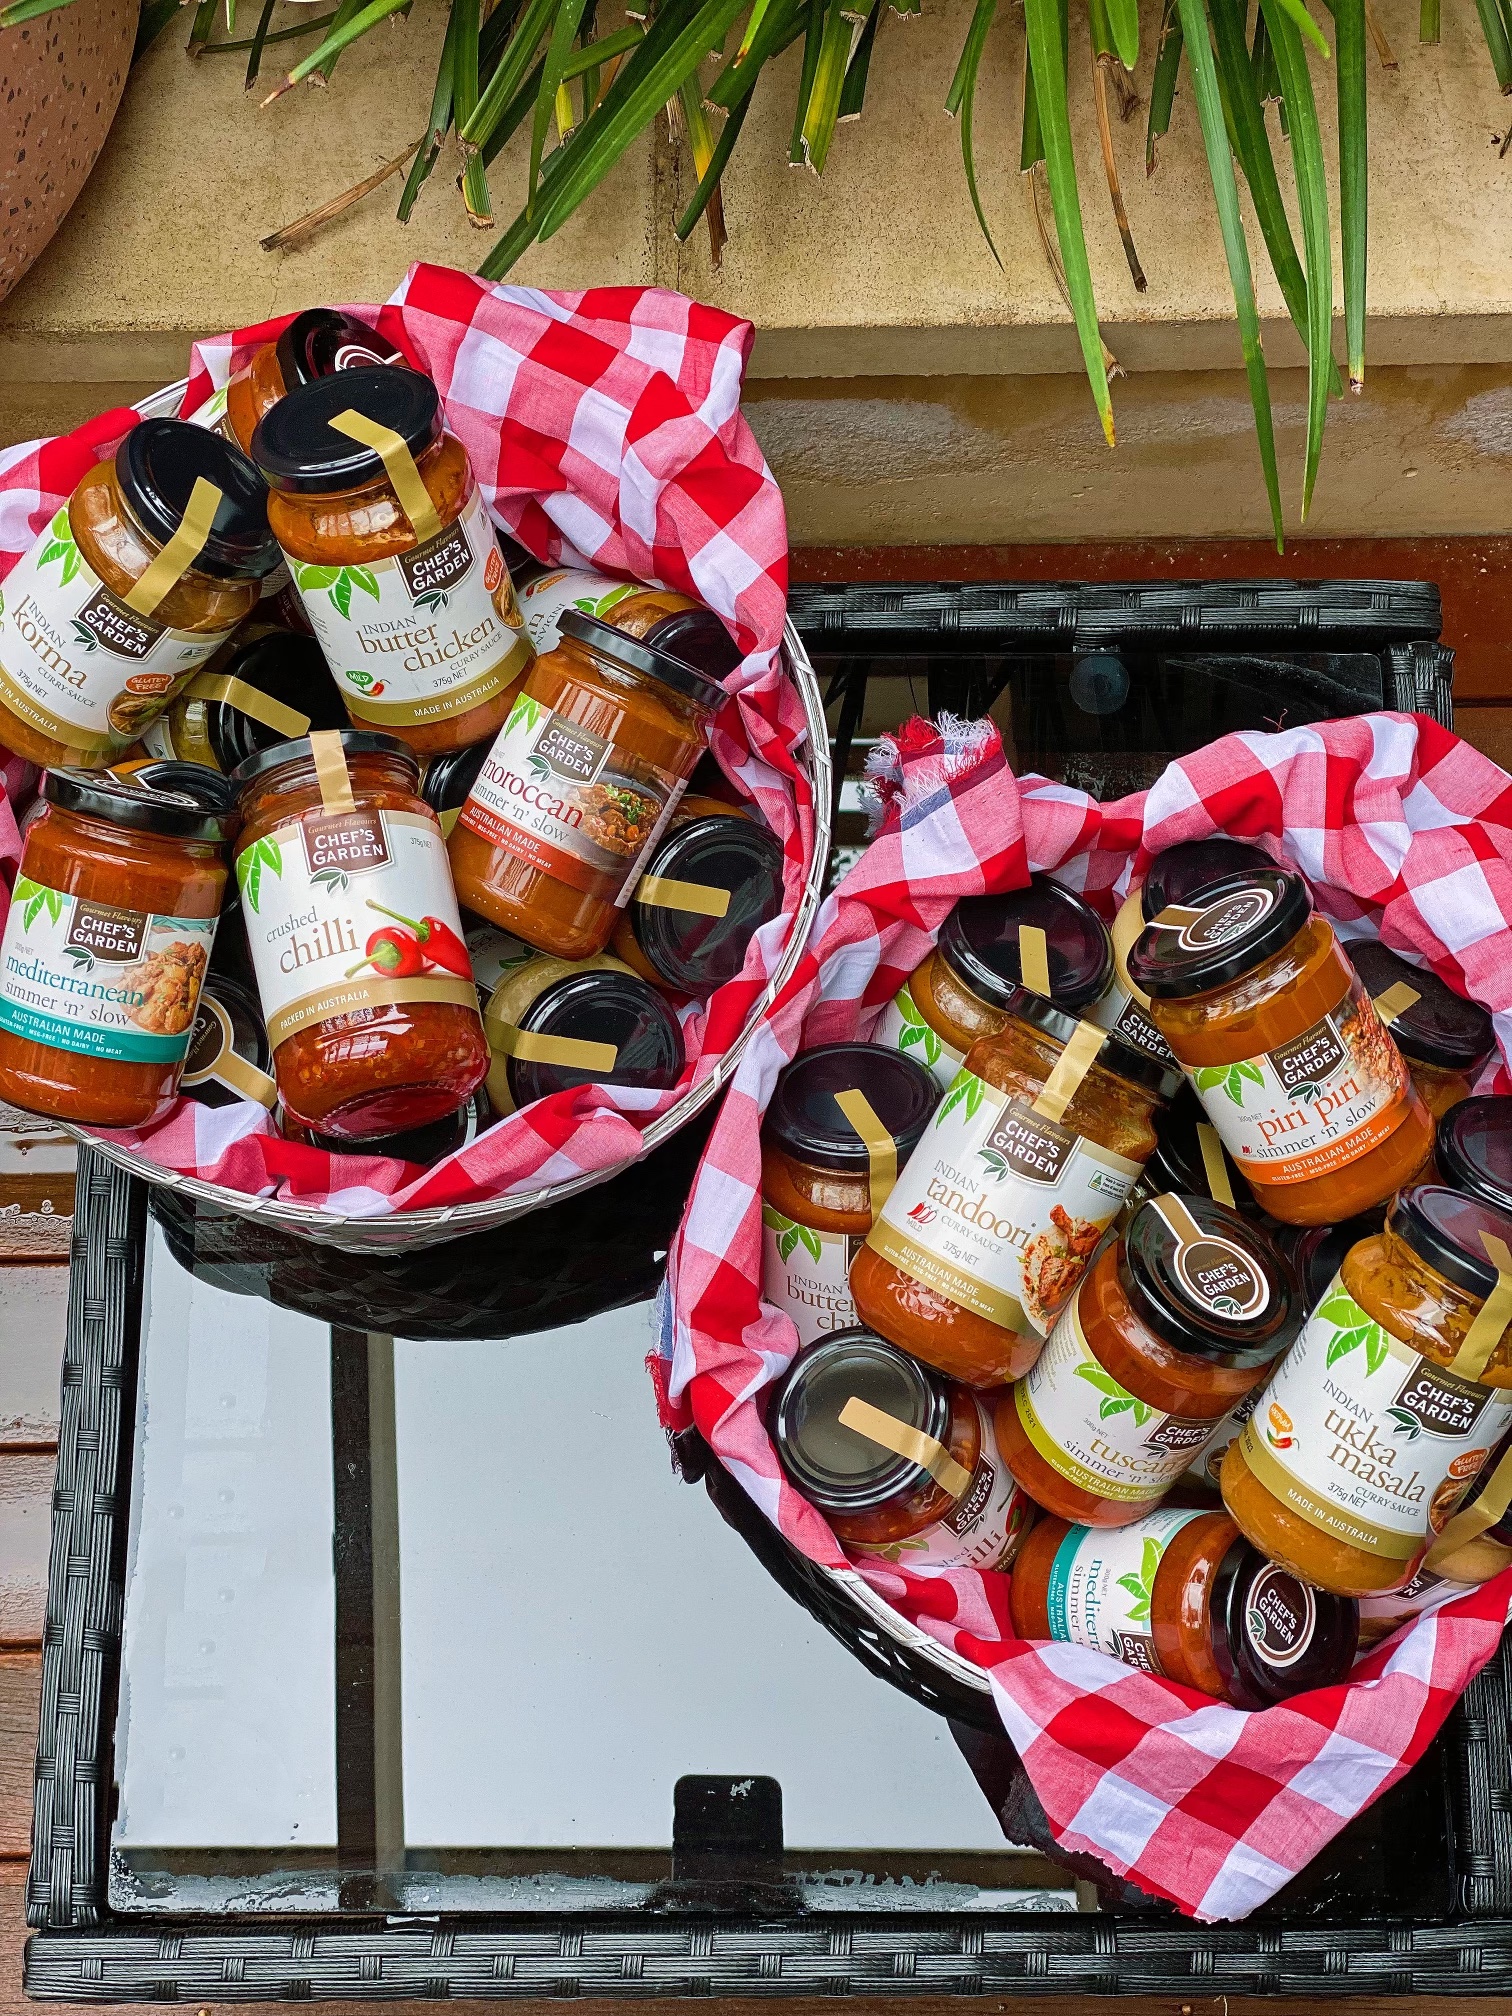 WIN two beautiful hampers filled with Simmer ‘n’ Slow Cooking Sauces and Indian Curry Sauces from Chef’s Garden